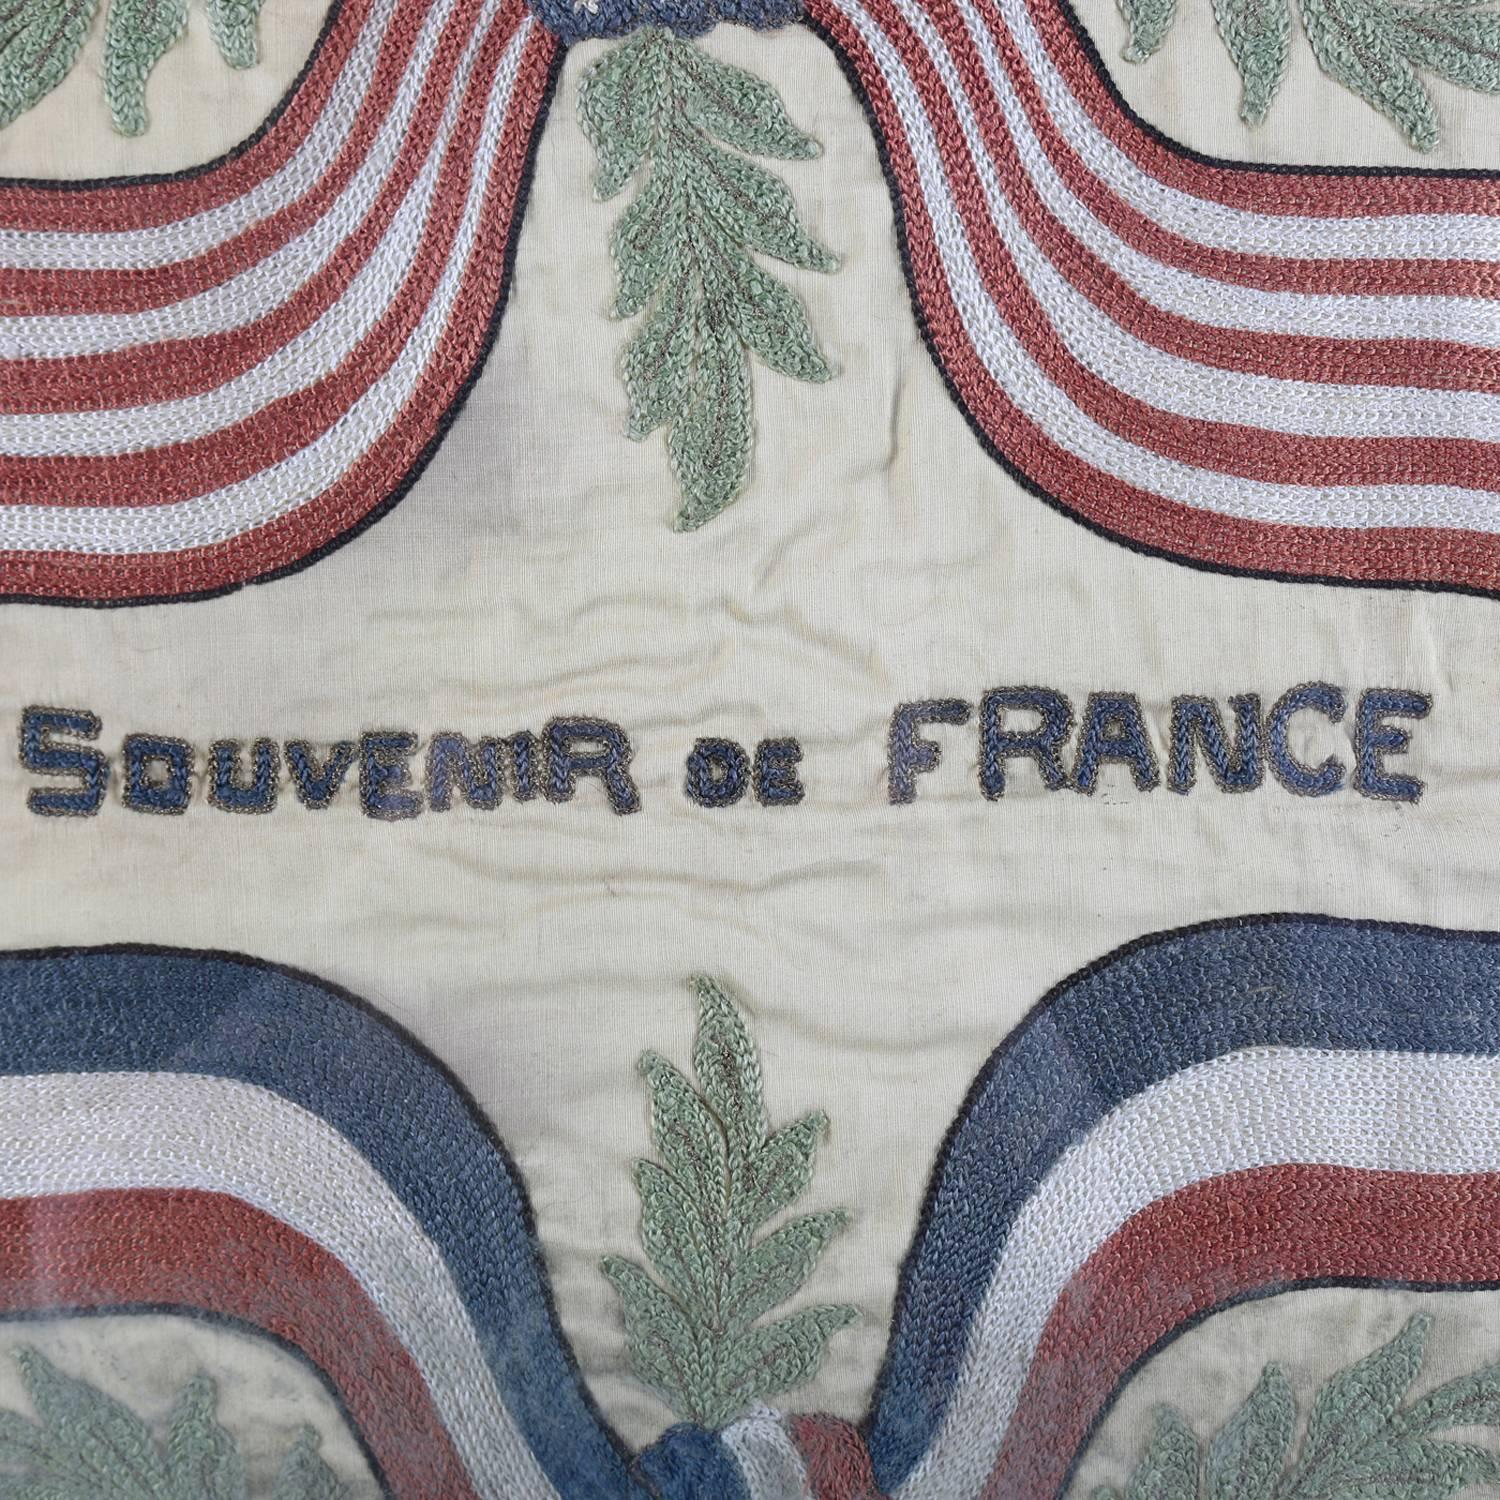 Framed antique French embroidered souvenir linen features central 